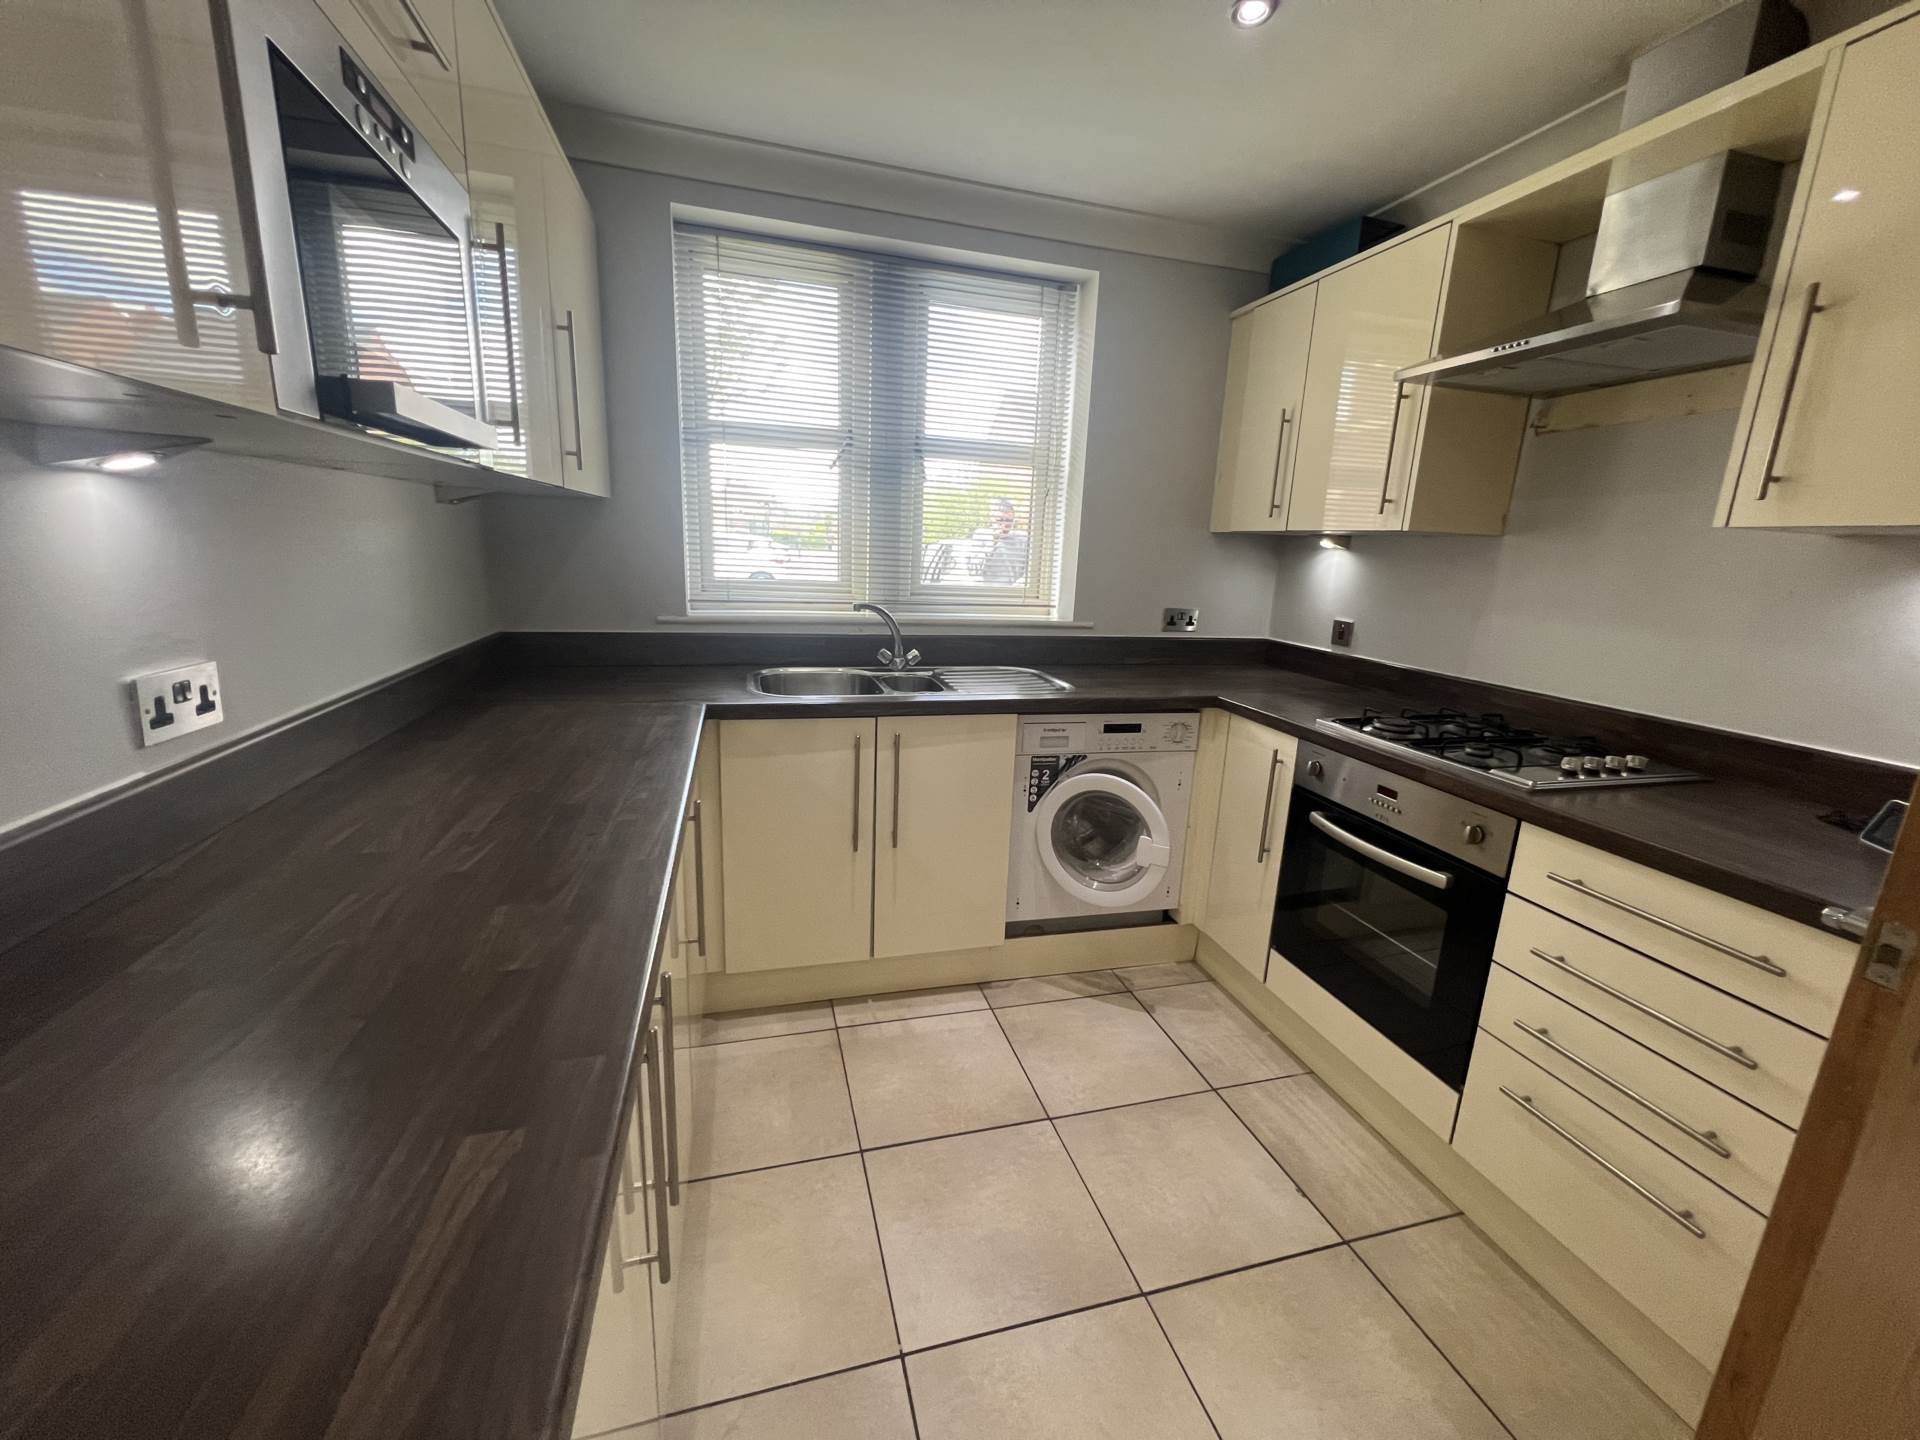 4 bed House (unspecified) for rent in Warrington. From HLGB - Warrington